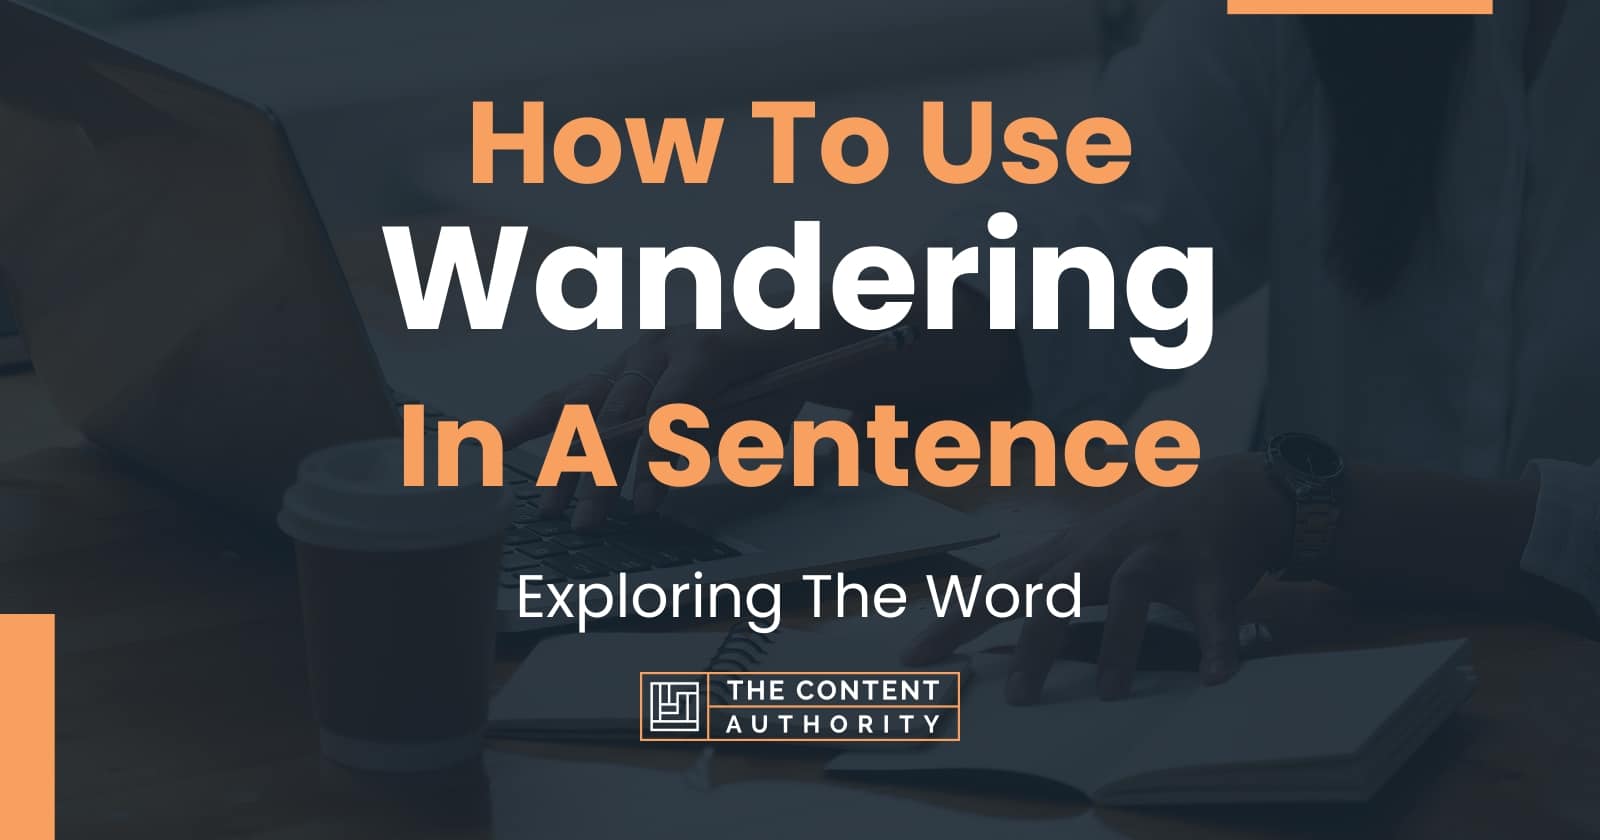 meaning of wandering with sentence